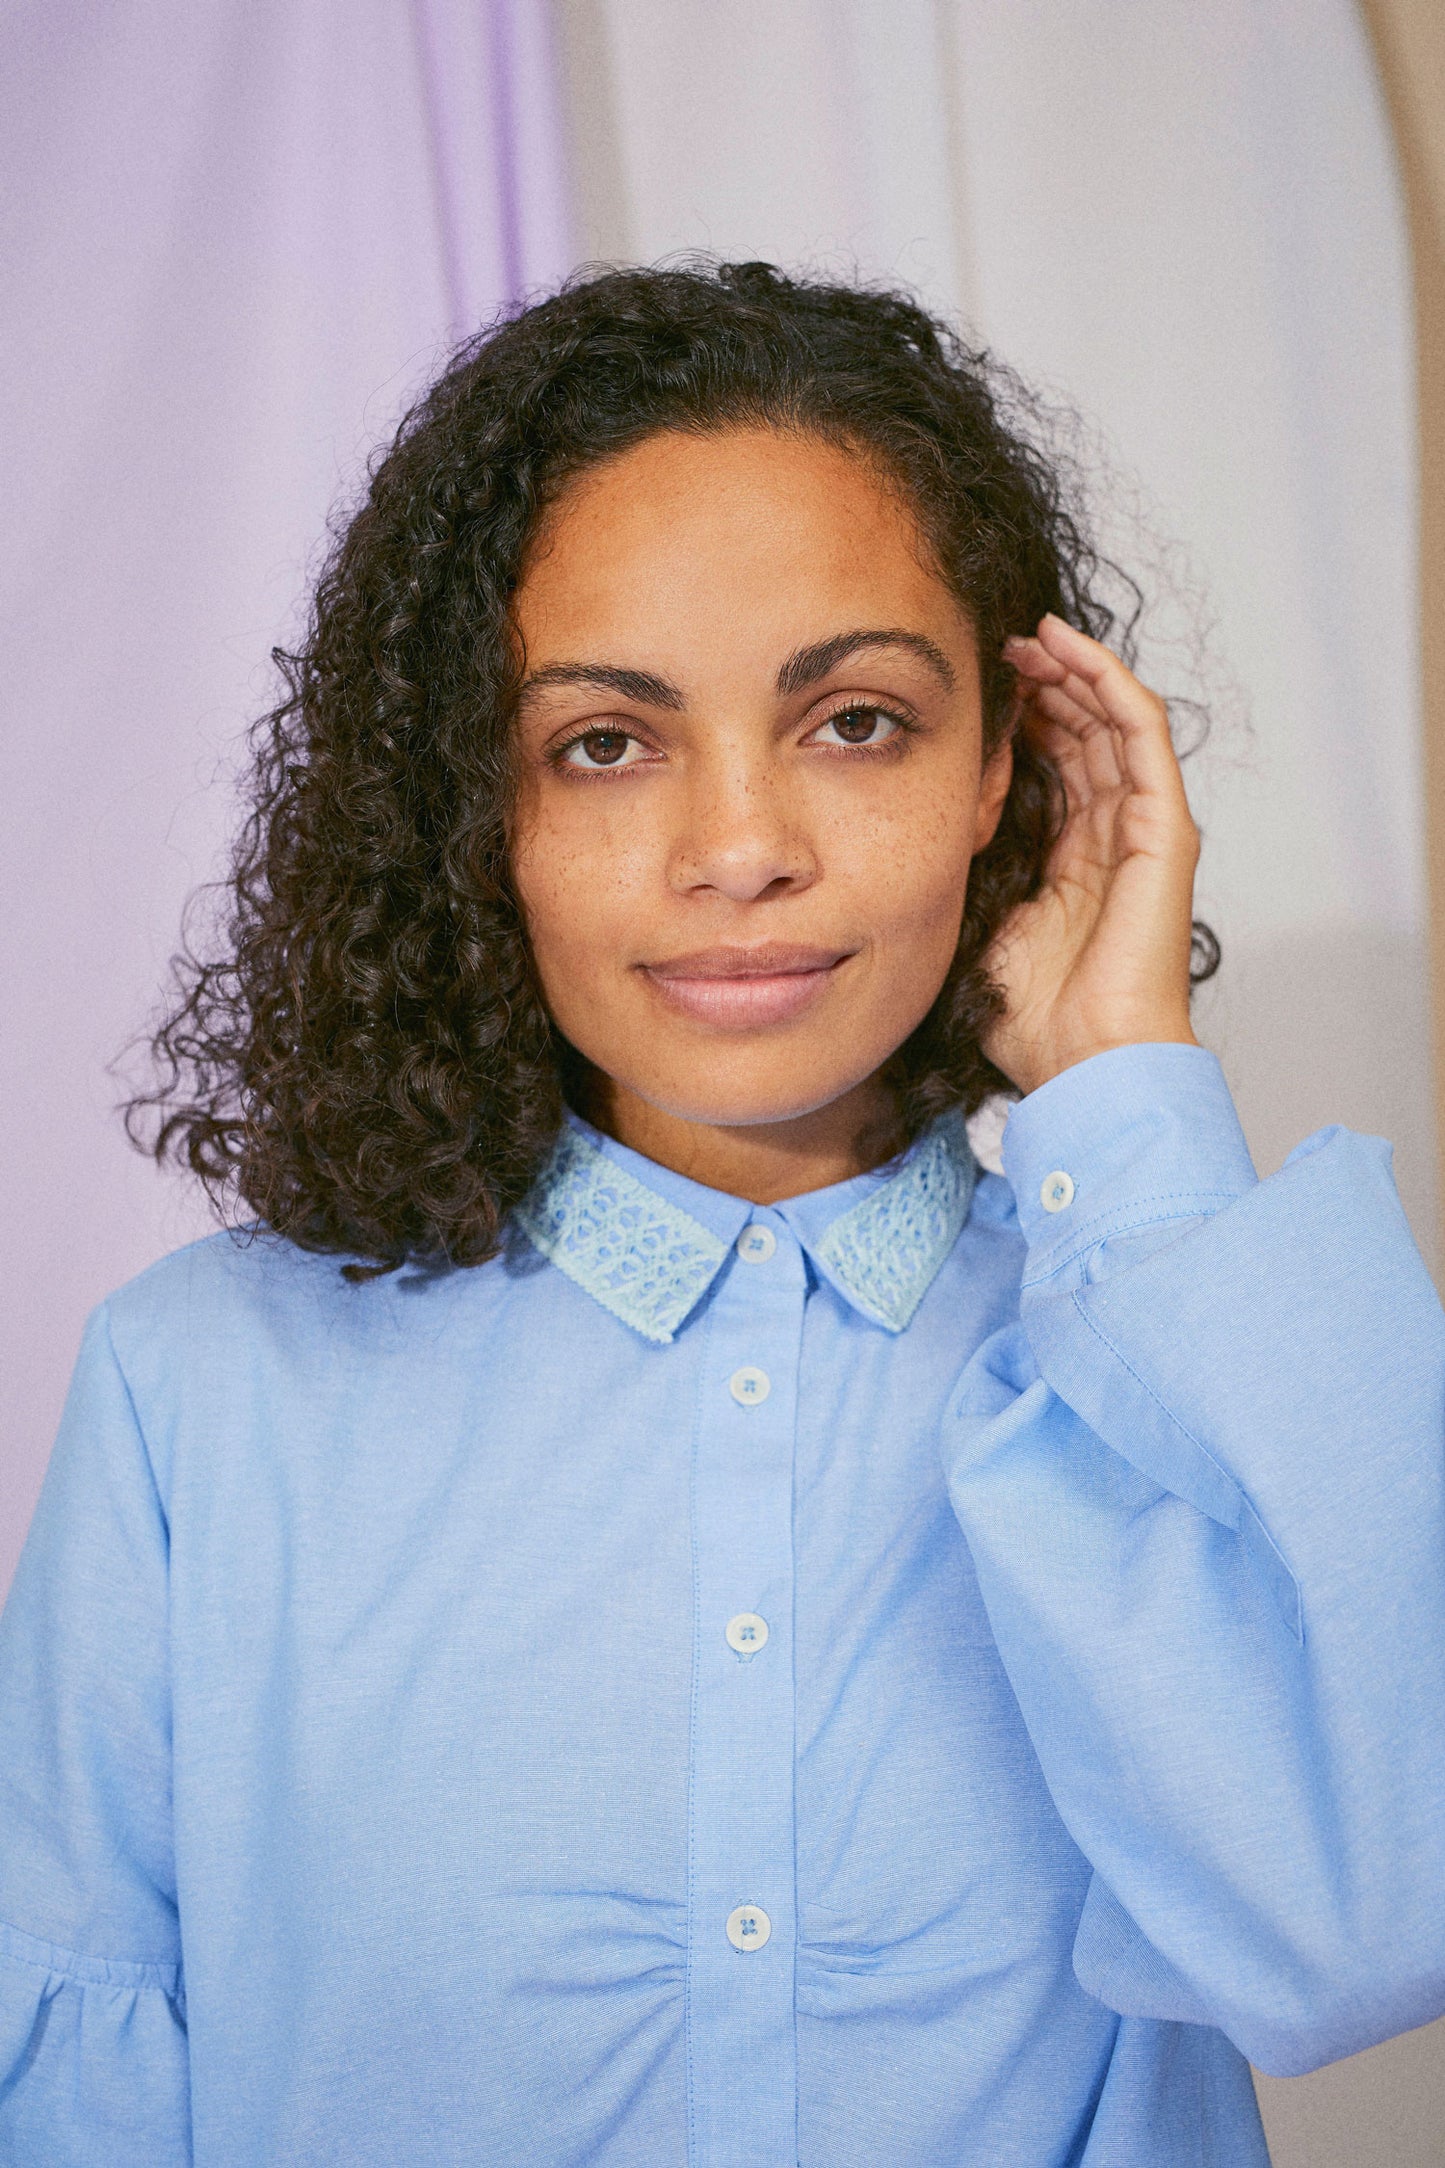 Womens pale blue shirt in recycled cotton, with lace collar trims, volume sleeves, and soft gathers at the bust, close up